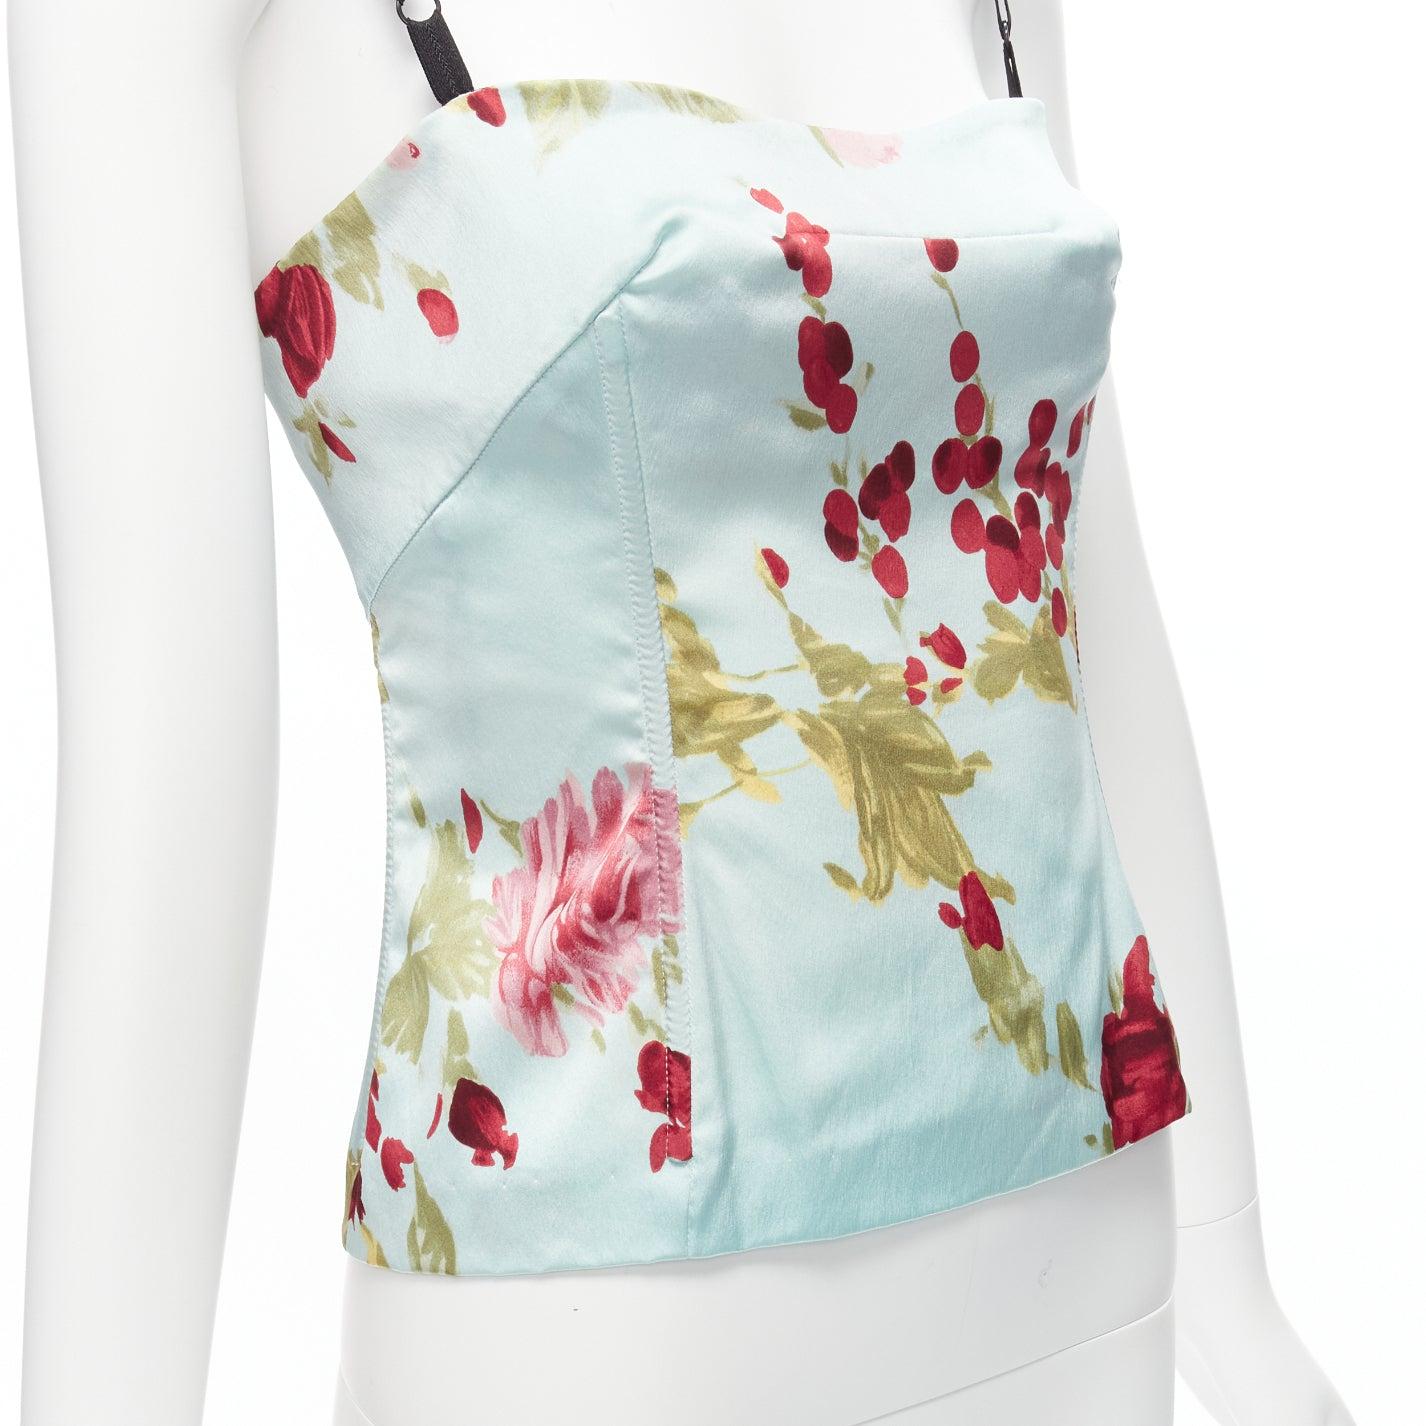 DOLCE GABBANA Vintage baby blue satin red rose print boned cami top IT40A S
Reference: TGAS/D00411
Brand: Dolce Gabbana
Designer: Domenico Dolce and Stefano Gabbana
Material: Silk, Blend
Color: Blue, Black
Pattern: Floral
Closure: Zip
Lining: Black